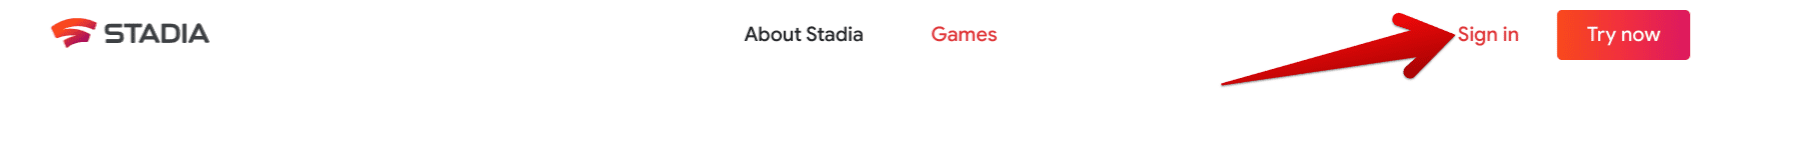 Signing into Stadia with Google Play